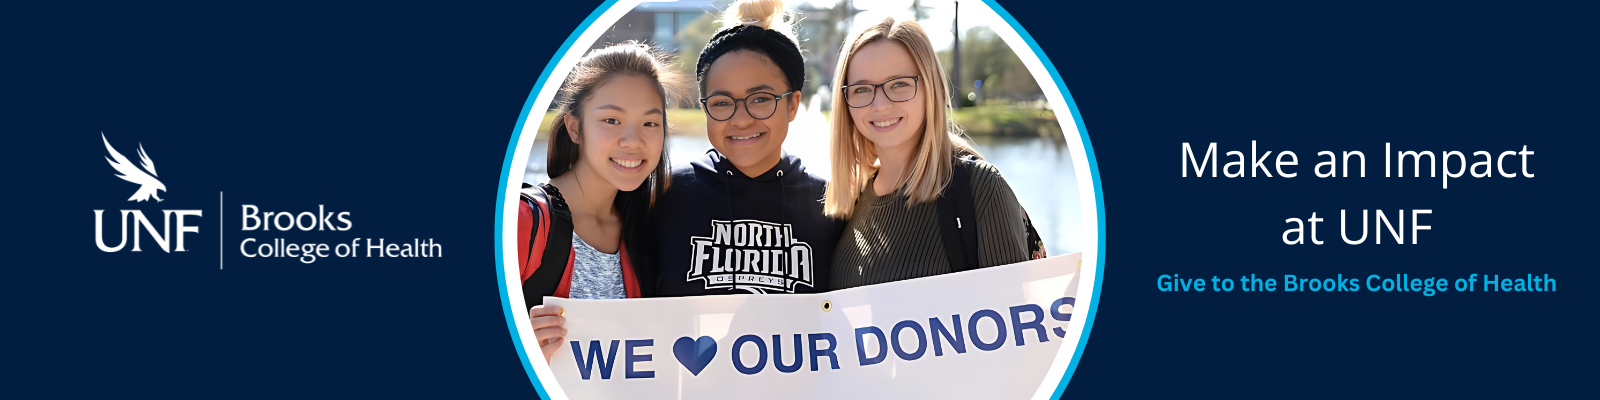 UNF Brooks College of Health Logo. Three UNF BCH students holding a sign that says We heart our donors. Make an Impact at UNF. Give to the Brooks College of Health.